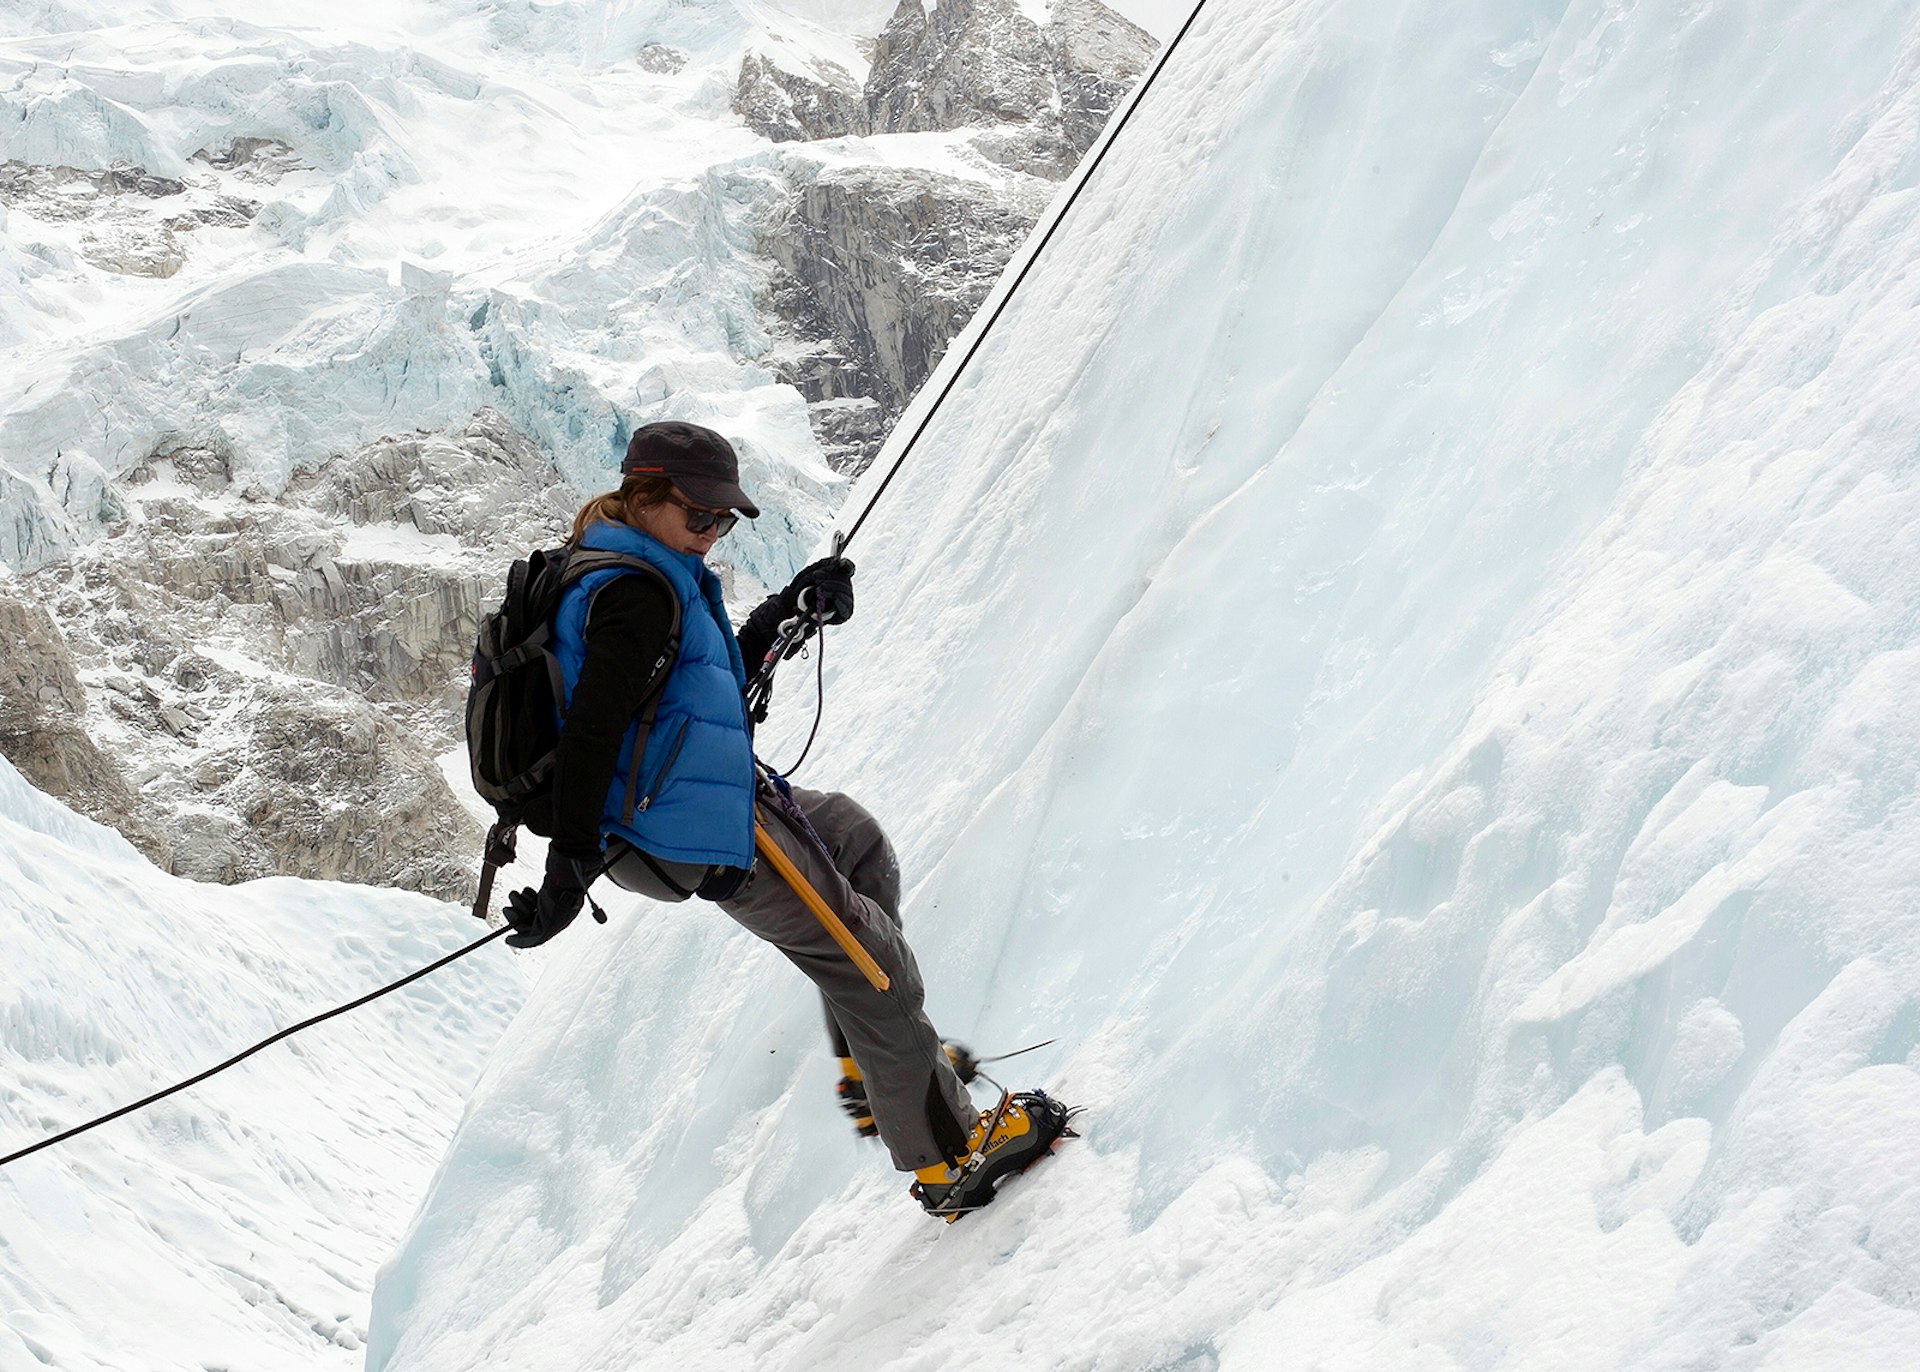 Jennifer Peedom descending by rope down the ice-covered flank of a mountain © Jennifer Peedom